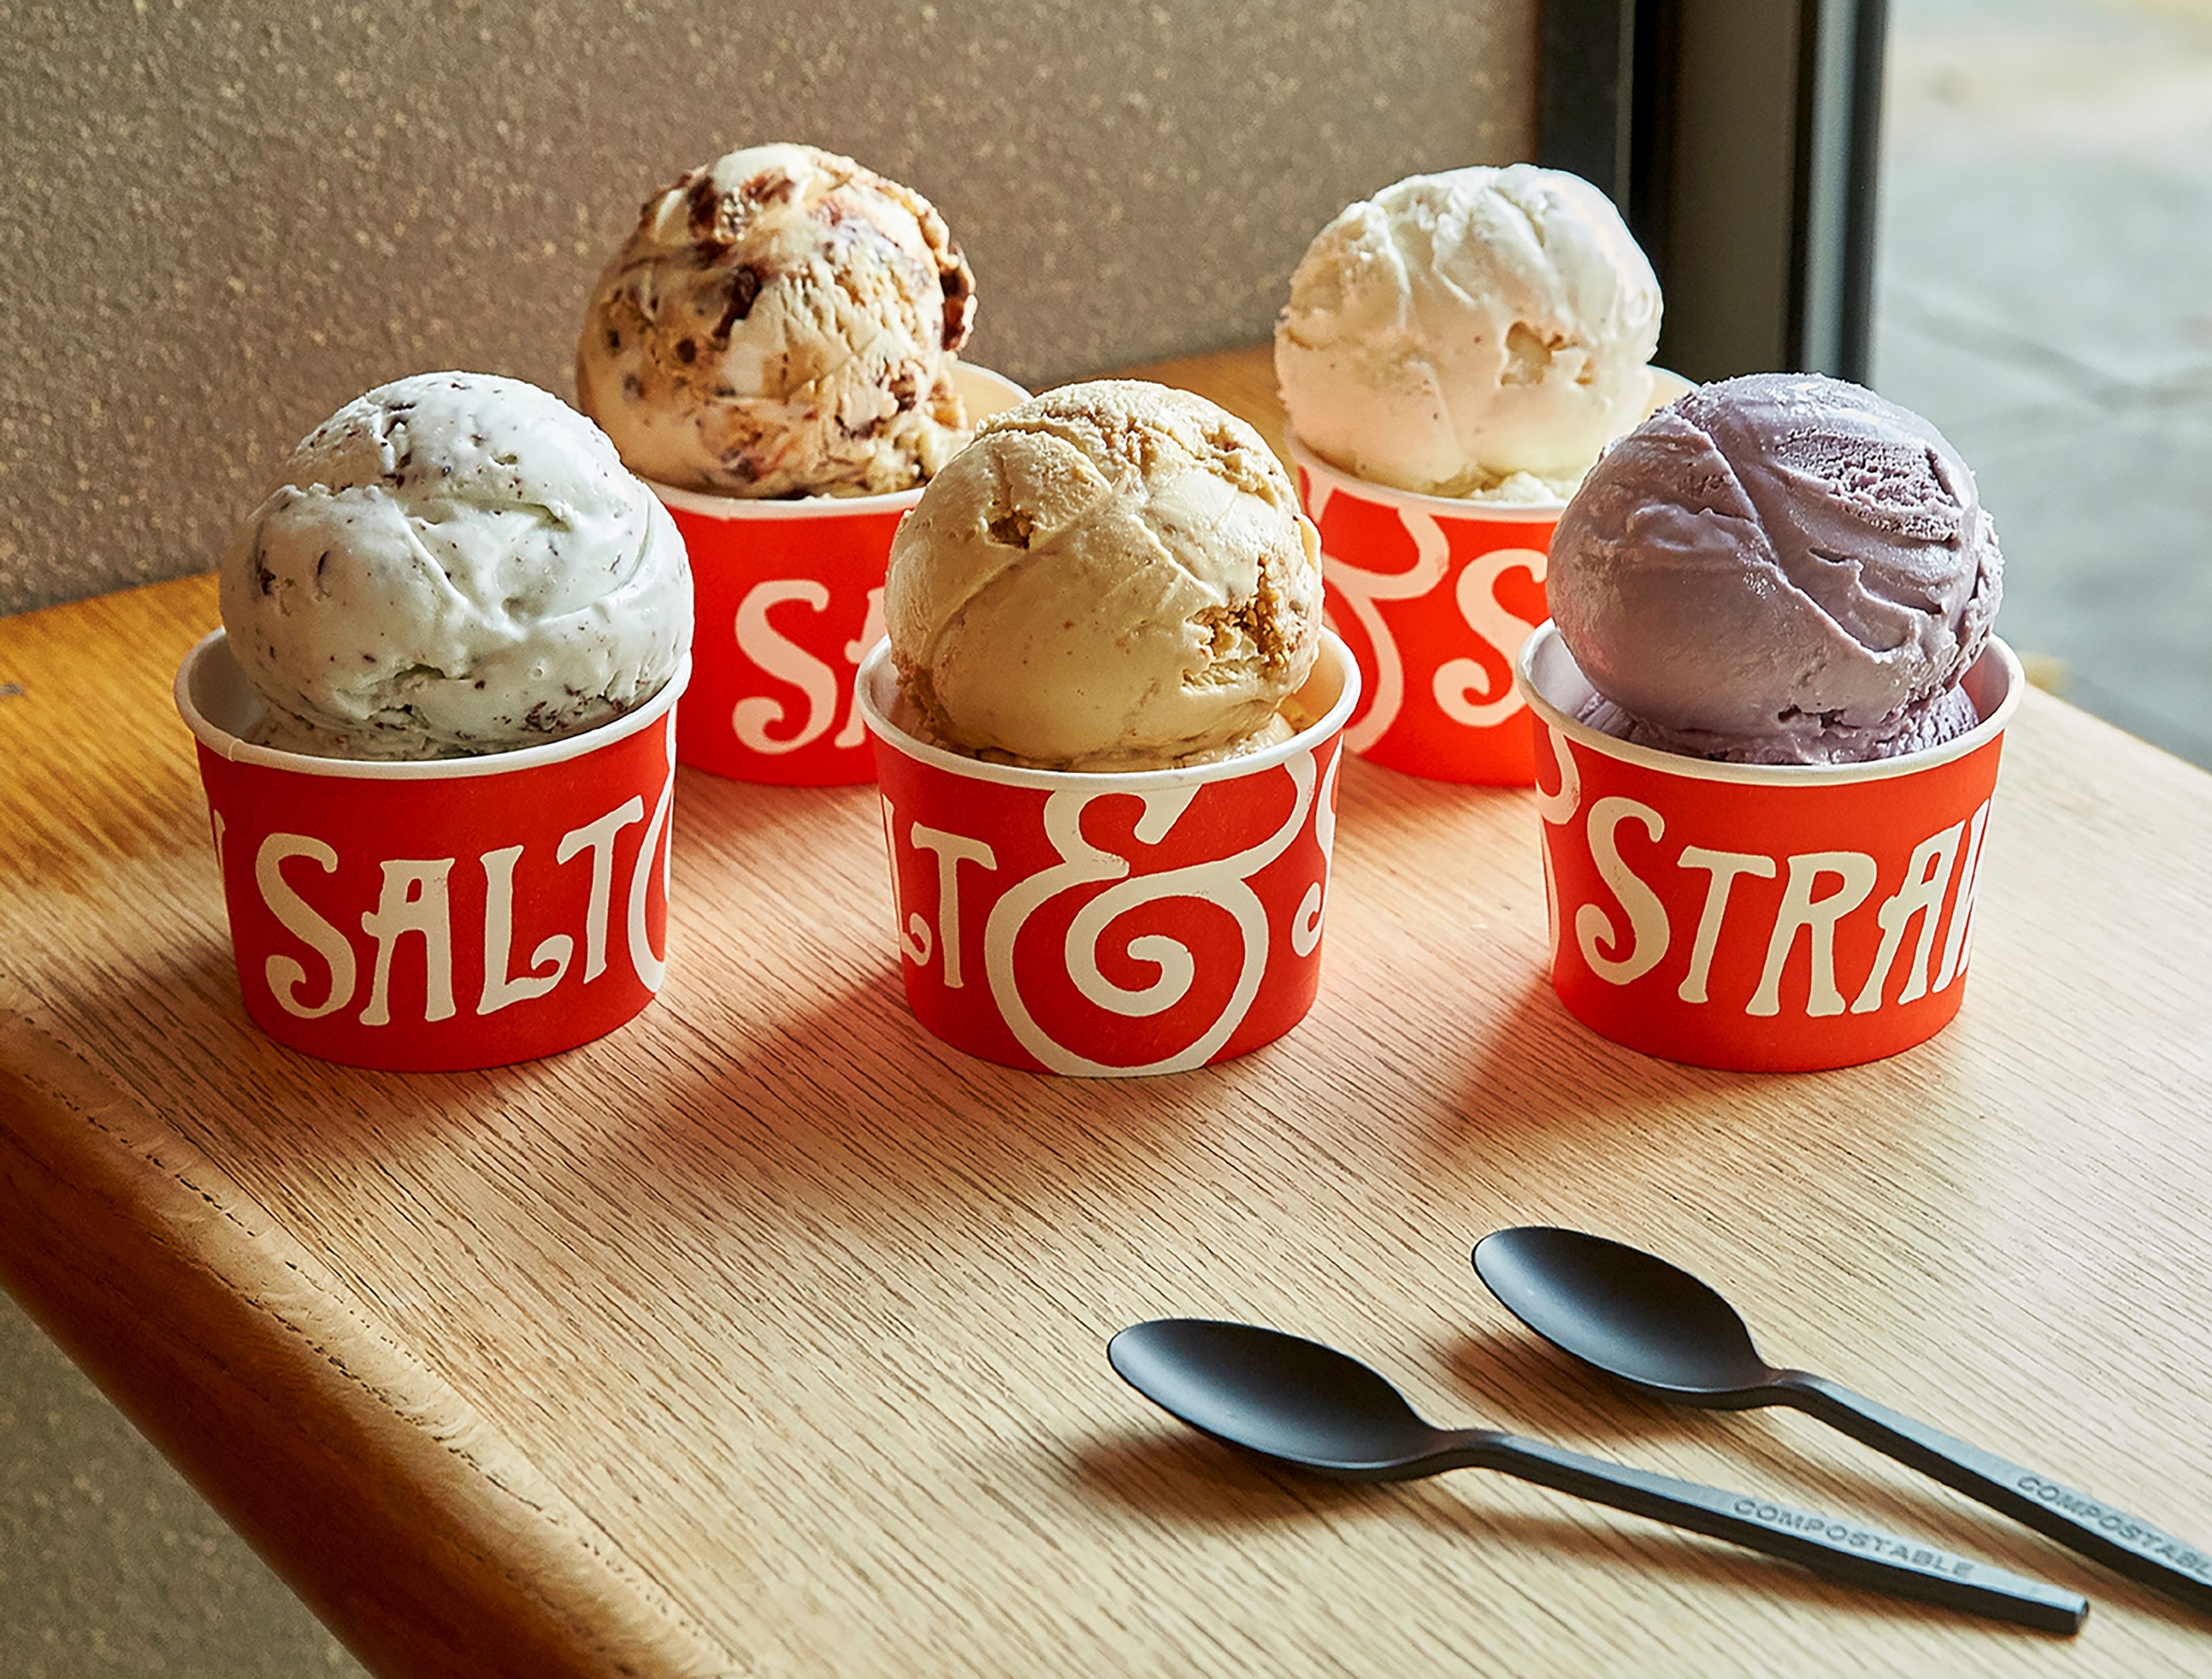 This image provided by Salt & Straw shows a variety of the West Coast ice creamery's unique flavors. The company offers interesting combos like Pistachio with Saffron, and Hibiscus and Coconut. Others sound like a warm hug in gelid form: Jasmine Milk Tea laced with chocolate-coated almond slivers, or Rhubarb Crumble with Toasted Anise. (Salt & Straw via AP)